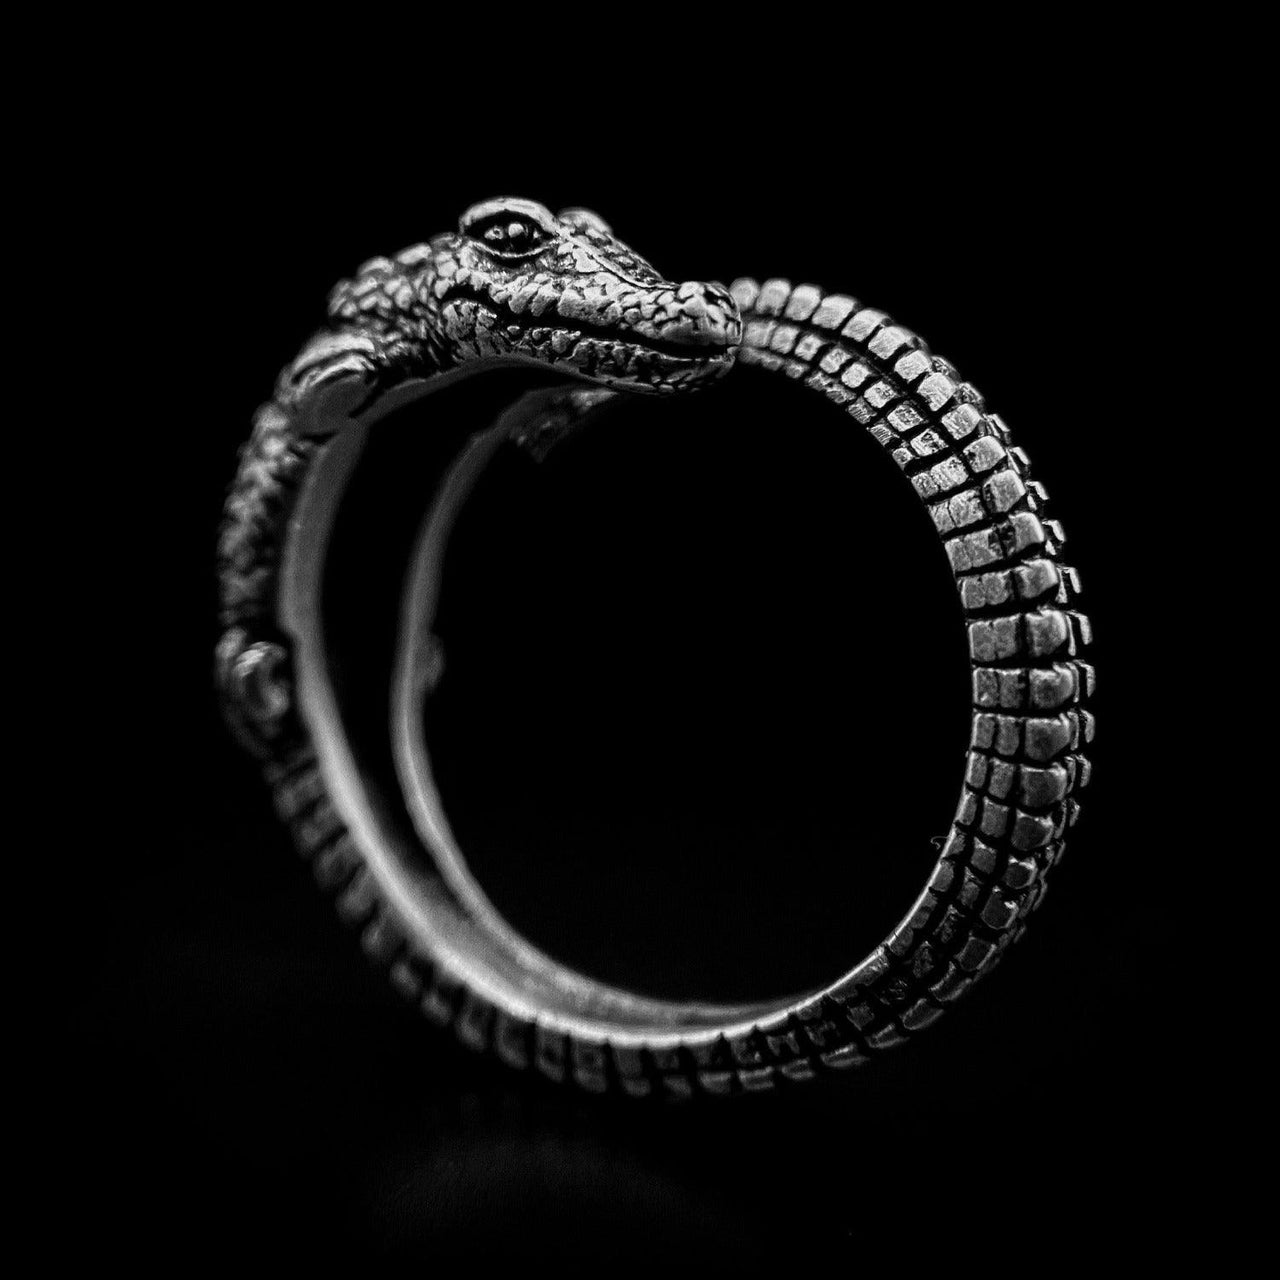 Wrapped Crocodile - 925 Sterling Silver by Black Feather Design